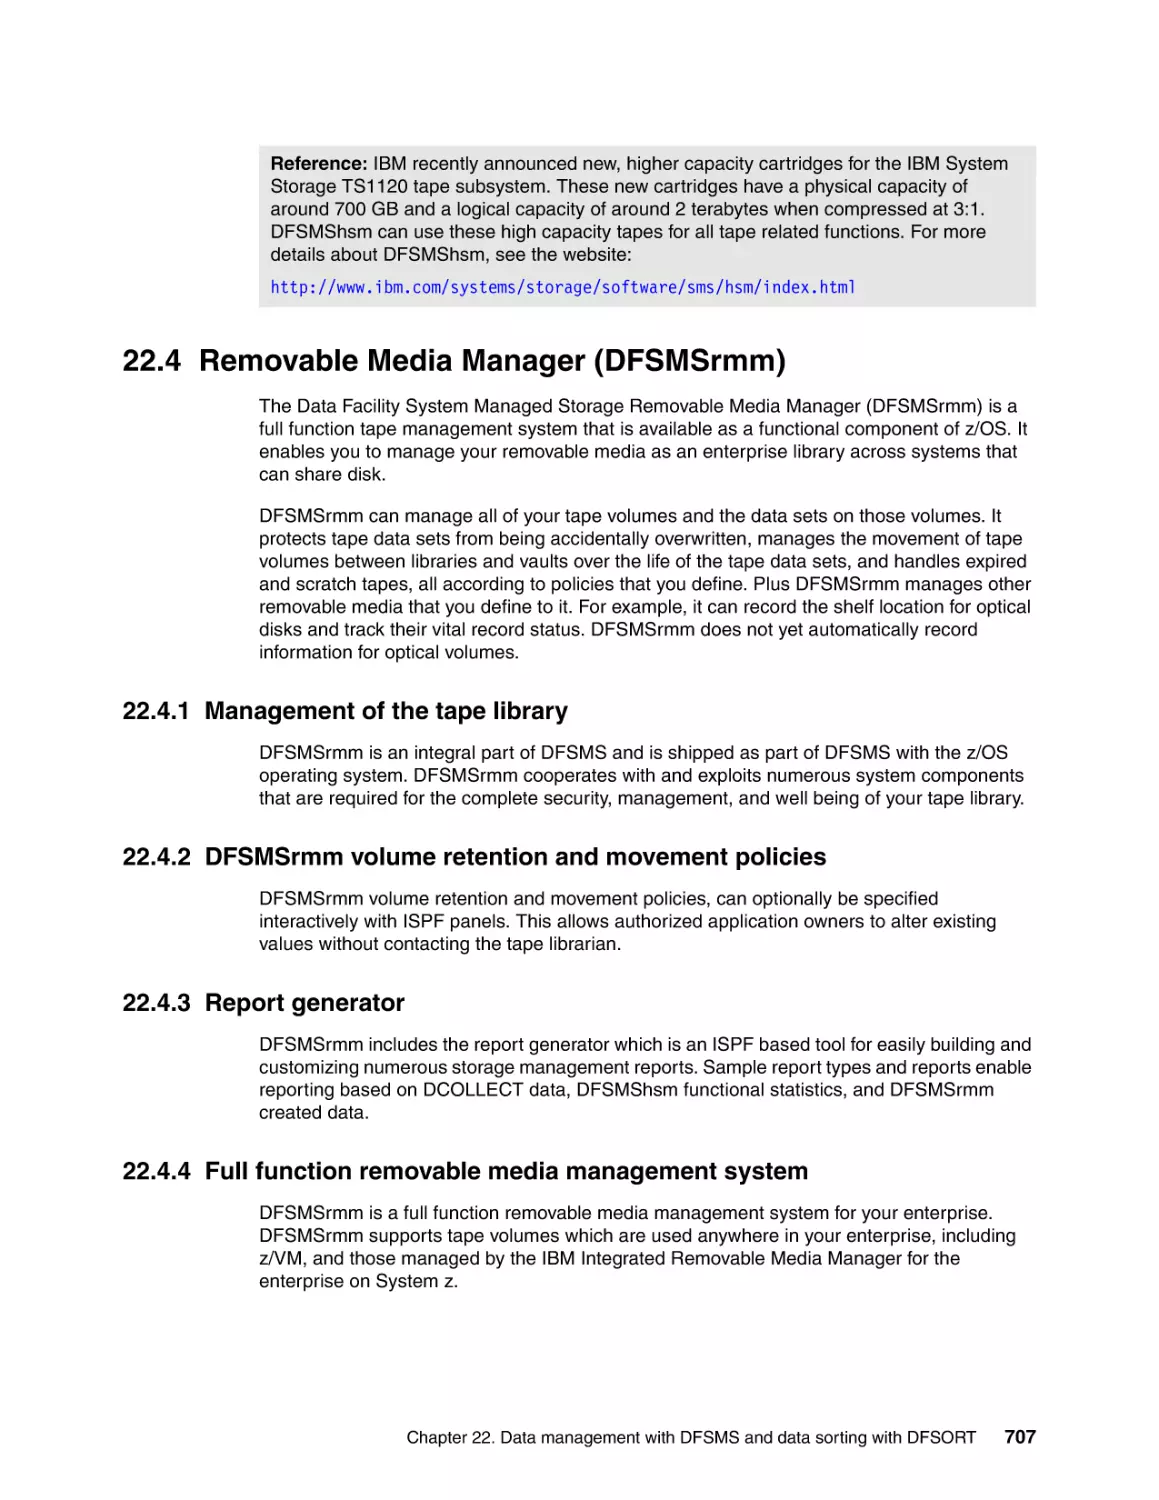 22.4 Removable Media Manager (DFSMSrmm)
22.4.1 Management of the tape library
22.4.2 DFSMSrmm volume retention and movement policies
22.4.3 Report generator
22.4.4 Full function removable media management system